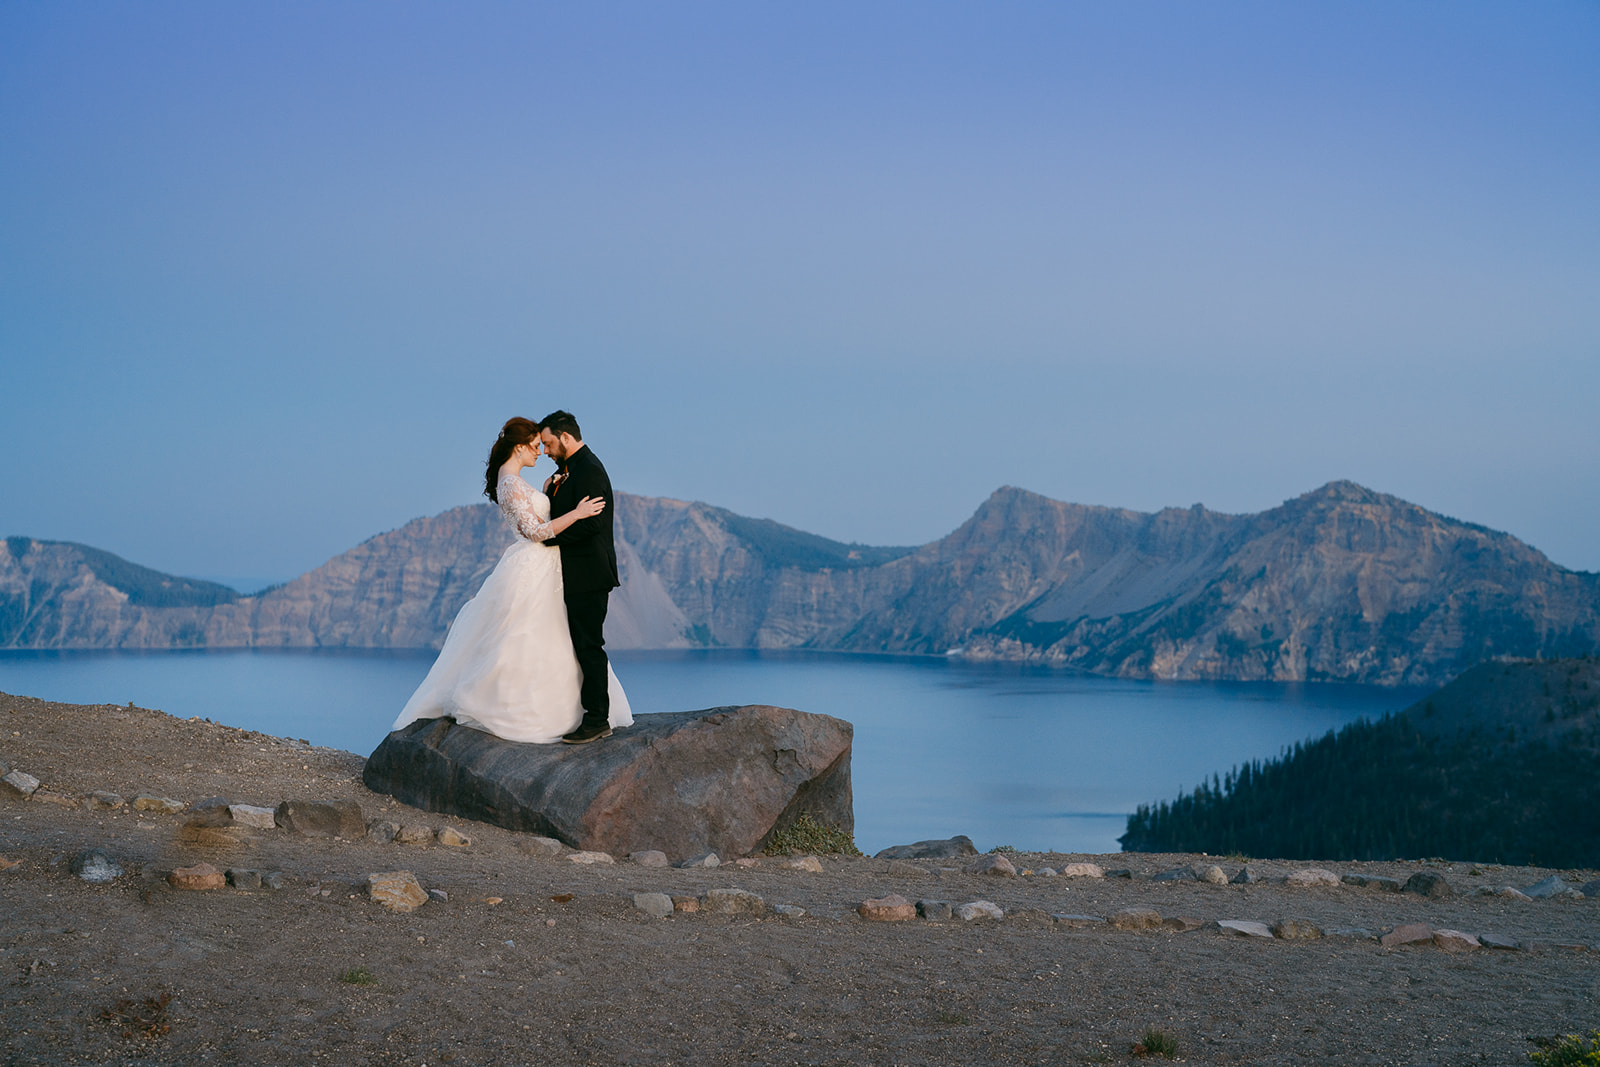 A couple standing together in front of Crater Lake after their vow exchange.